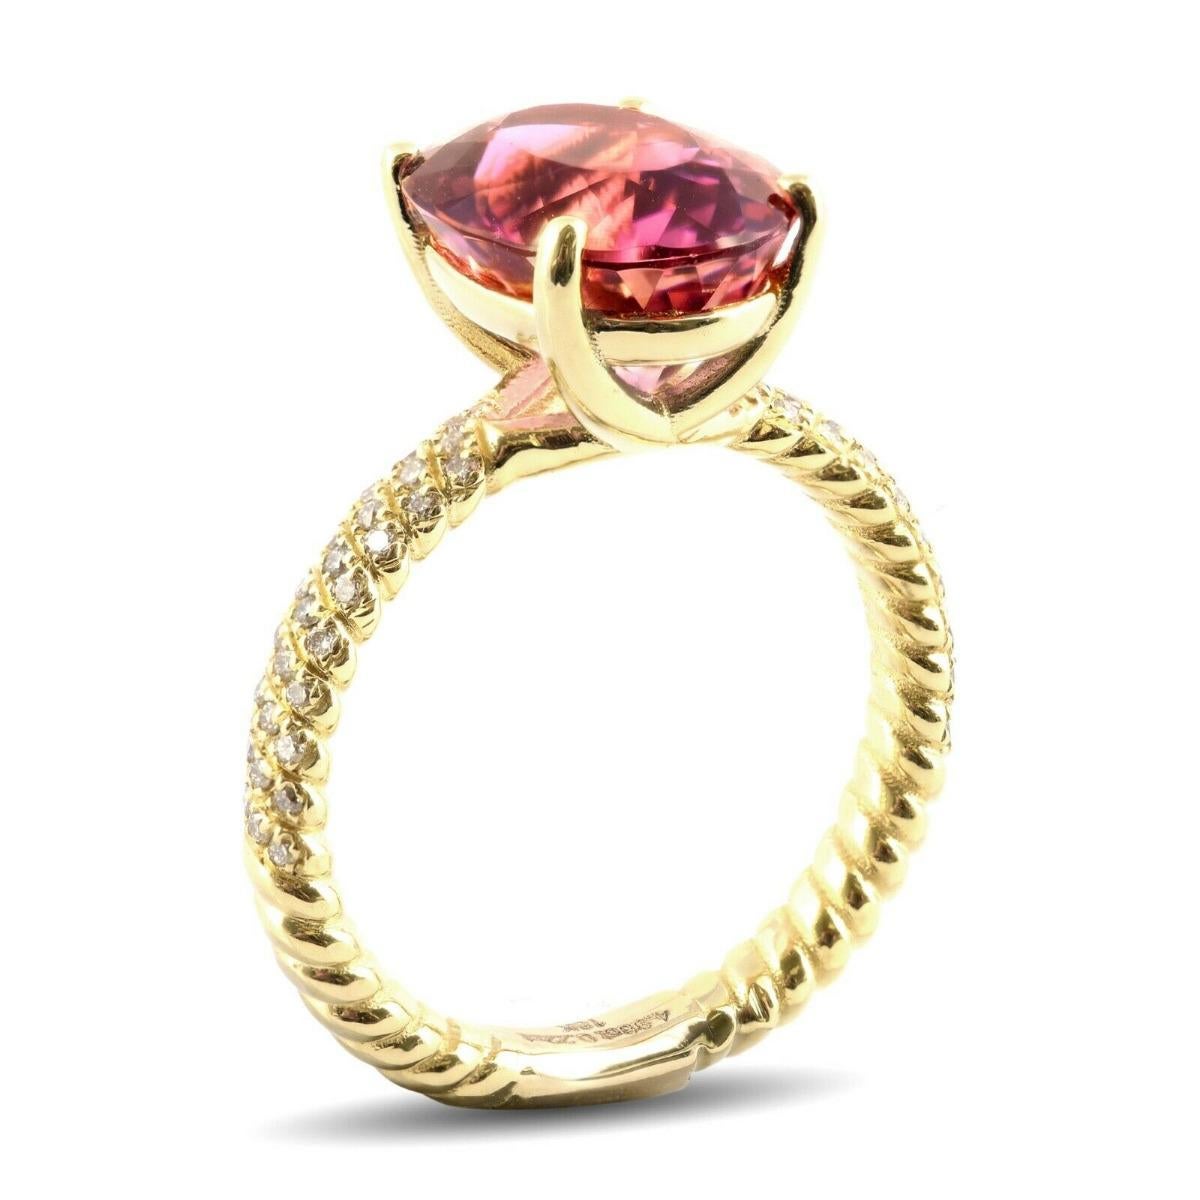 With a 4.96 carats intense Pink Tourmaline at the center of this ring, you will surely make a statement. Set with a halo of diamonds this 18K yellow gold ring has a natural flow, which is both feminine and classy.

Ring Overview
SKU
3416
Center